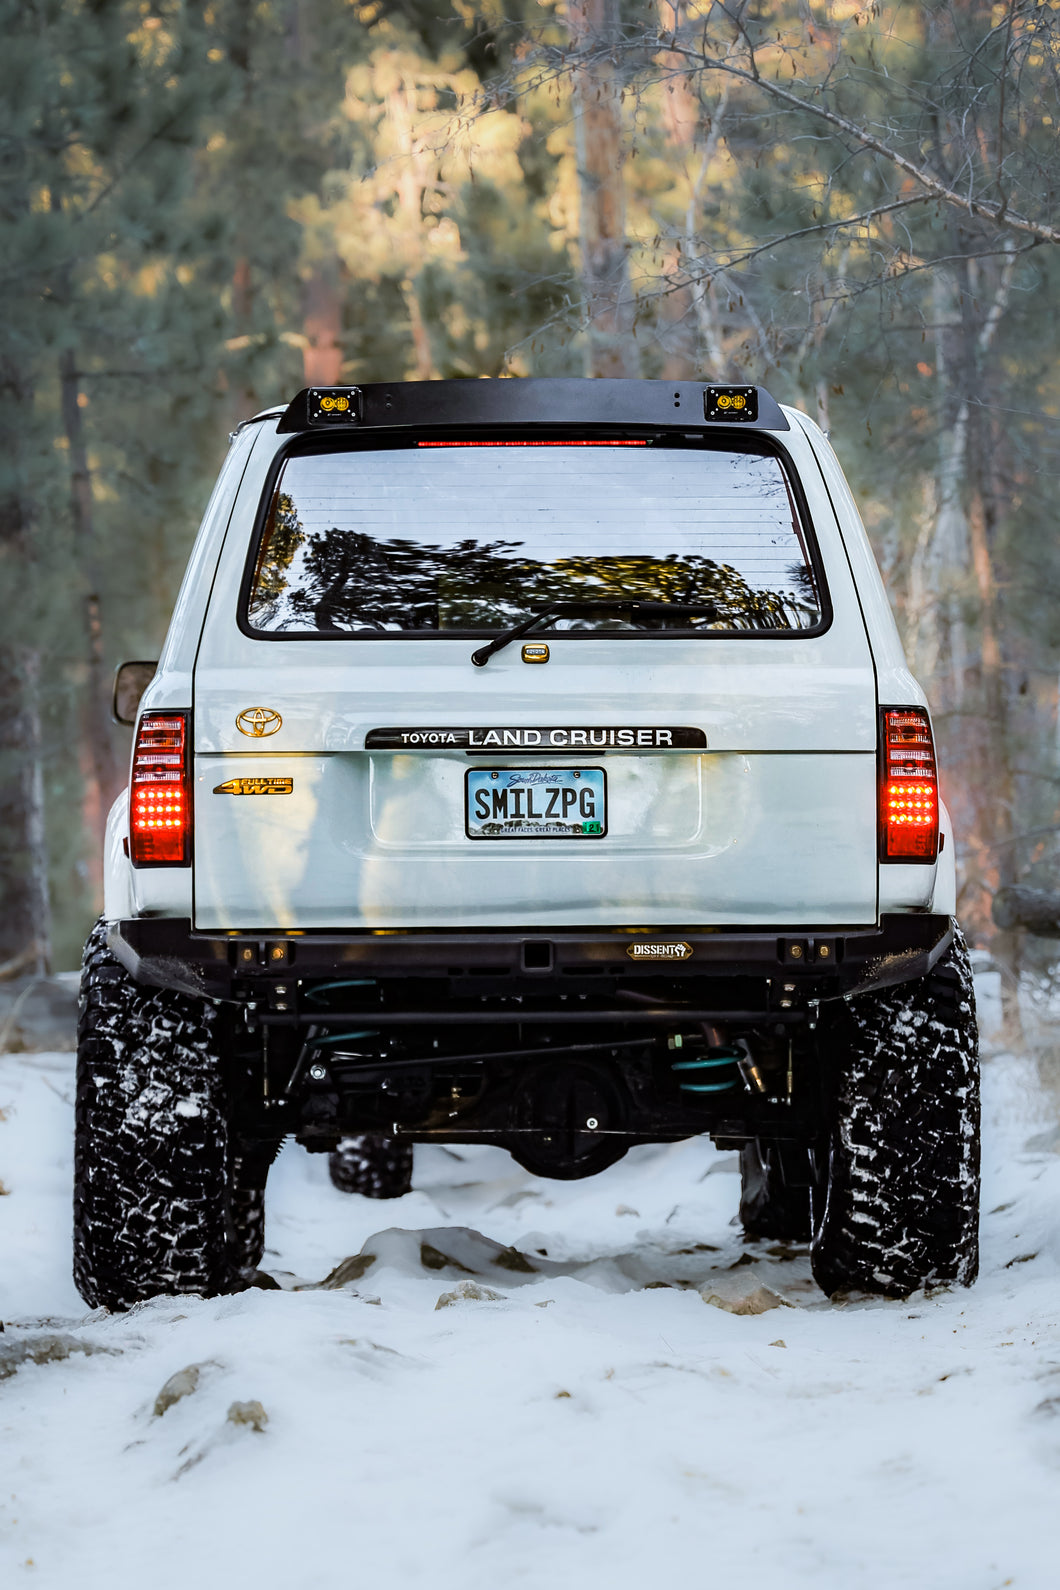 80 Series Land Cruiser with Snowbound Customs Chase Lights